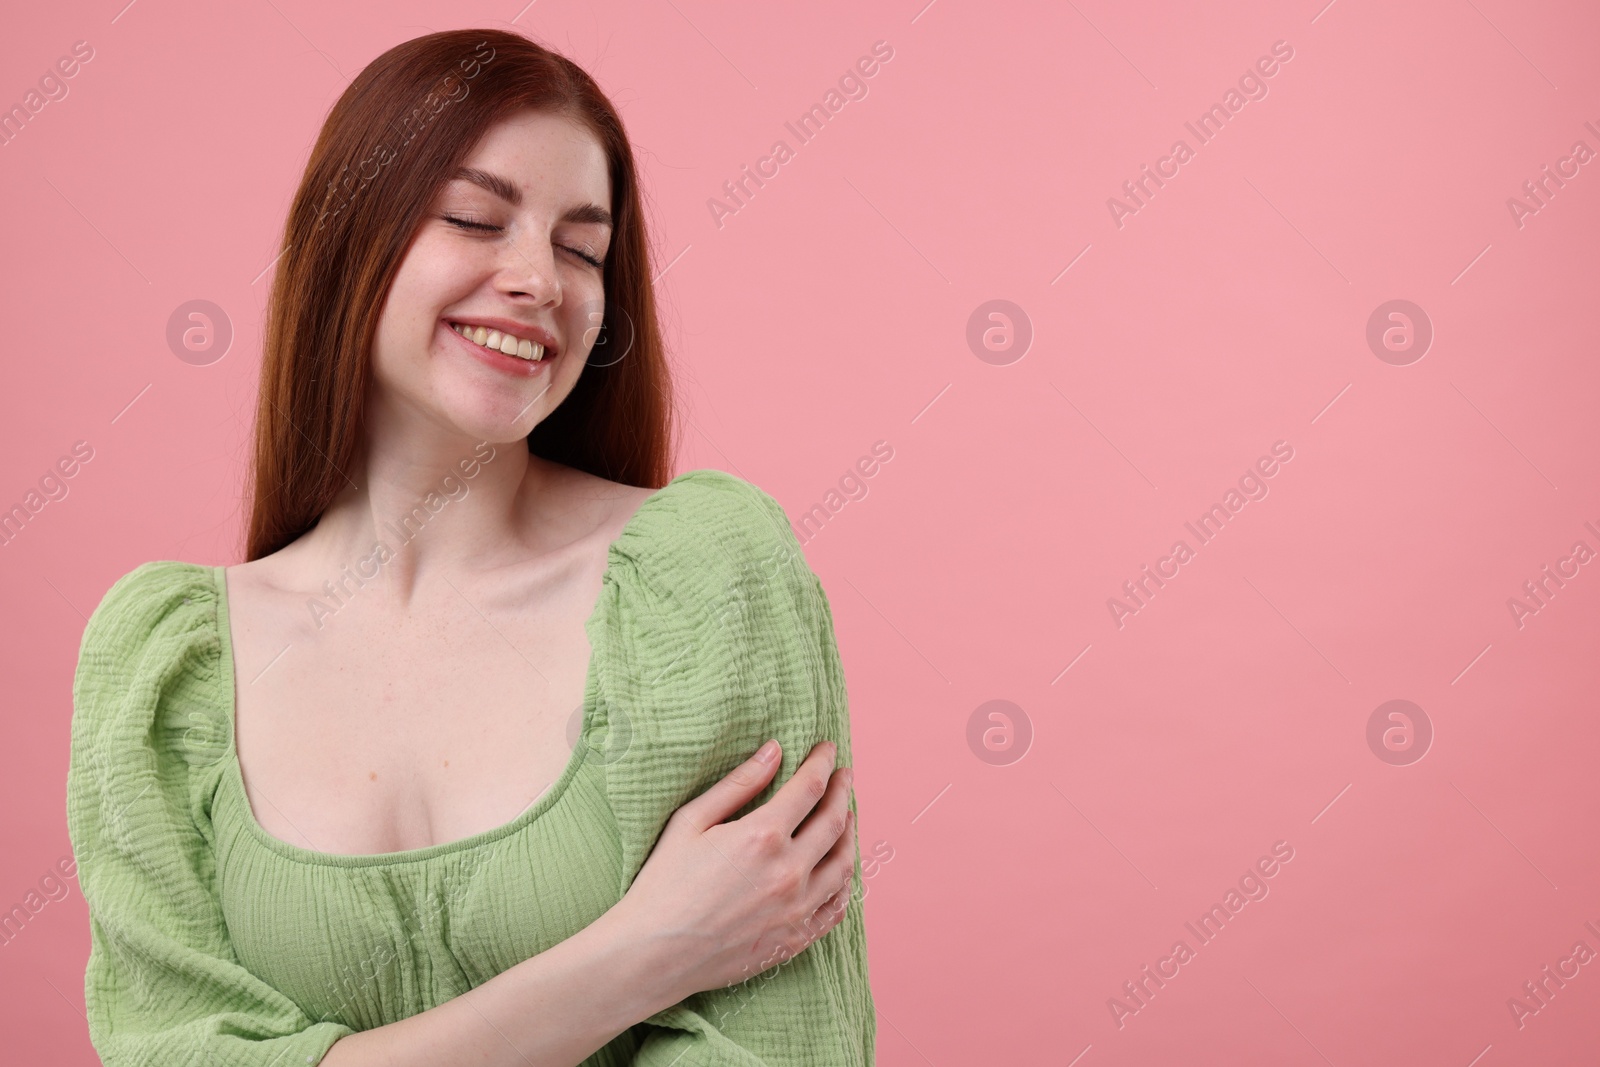 Photo of Portrait of smiling woman with freckles on pink background. Space for text